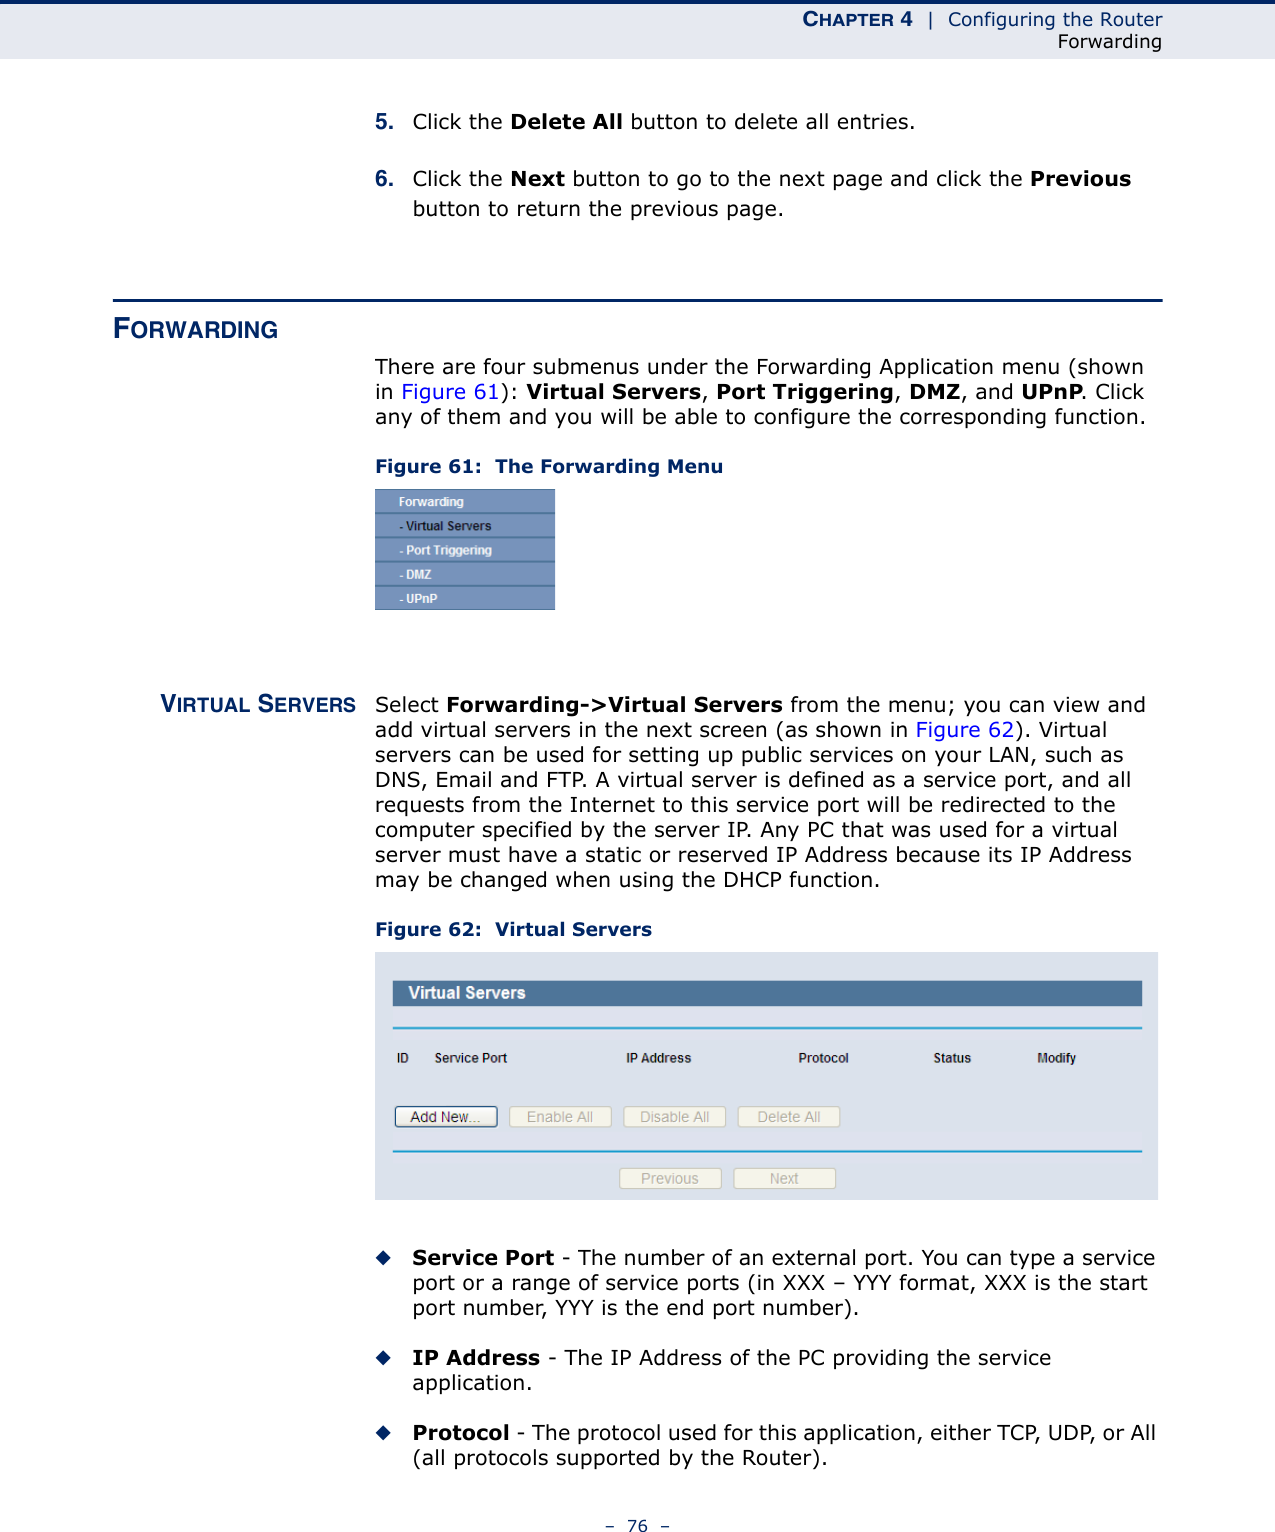 CHAPTER 4  |  Configuring the RouterForwarding–  76  –5. Click the Delete All button to delete all entries.6. Click the Next button to go to the next page and click the Previous button to return the previous page.FORWARDINGThere are four submenus under the Forwarding Application menu (shown in Figure 61): Virtual Servers, Port Triggering, DMZ, and UPnP. Click any of them and you will be able to configure the corresponding function.Figure 61:  The Forwarding MenuVIRTUAL SERVERS Select Forwarding-&gt;Virtual Servers from the menu; you can view and add virtual servers in the next screen (as shown in Figure 62). Virtual servers can be used for setting up public services on your LAN, such as DNS, Email and FTP. A virtual server is defined as a service port, and all requests from the Internet to this service port will be redirected to the computer specified by the server IP. Any PC that was used for a virtual server must have a static or reserved IP Address because its IP Address may be changed when using the DHCP function. Figure 62:  Virtual Servers◆Service Port - The number of an external port. You can type a service port or a range of service ports (in XXX – YYY format, XXX is the start port number, YYY is the end port number). ◆IP Address - The IP Address of the PC providing the service application.◆Protocol - The protocol used for this application, either TCP, UDP, or All (all protocols supported by the Router).